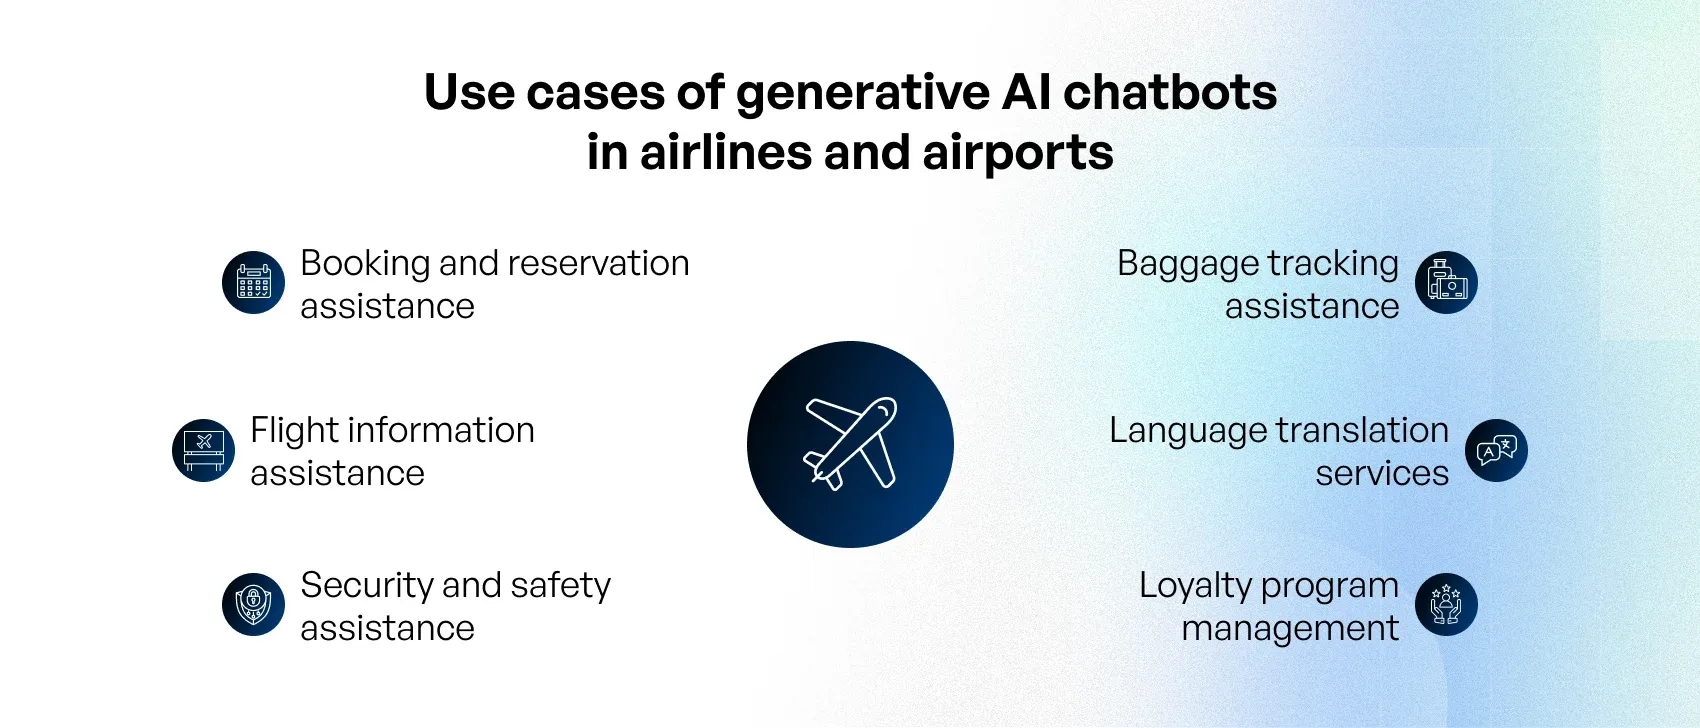 Use cases of generative AI chatbots in airlines and airports